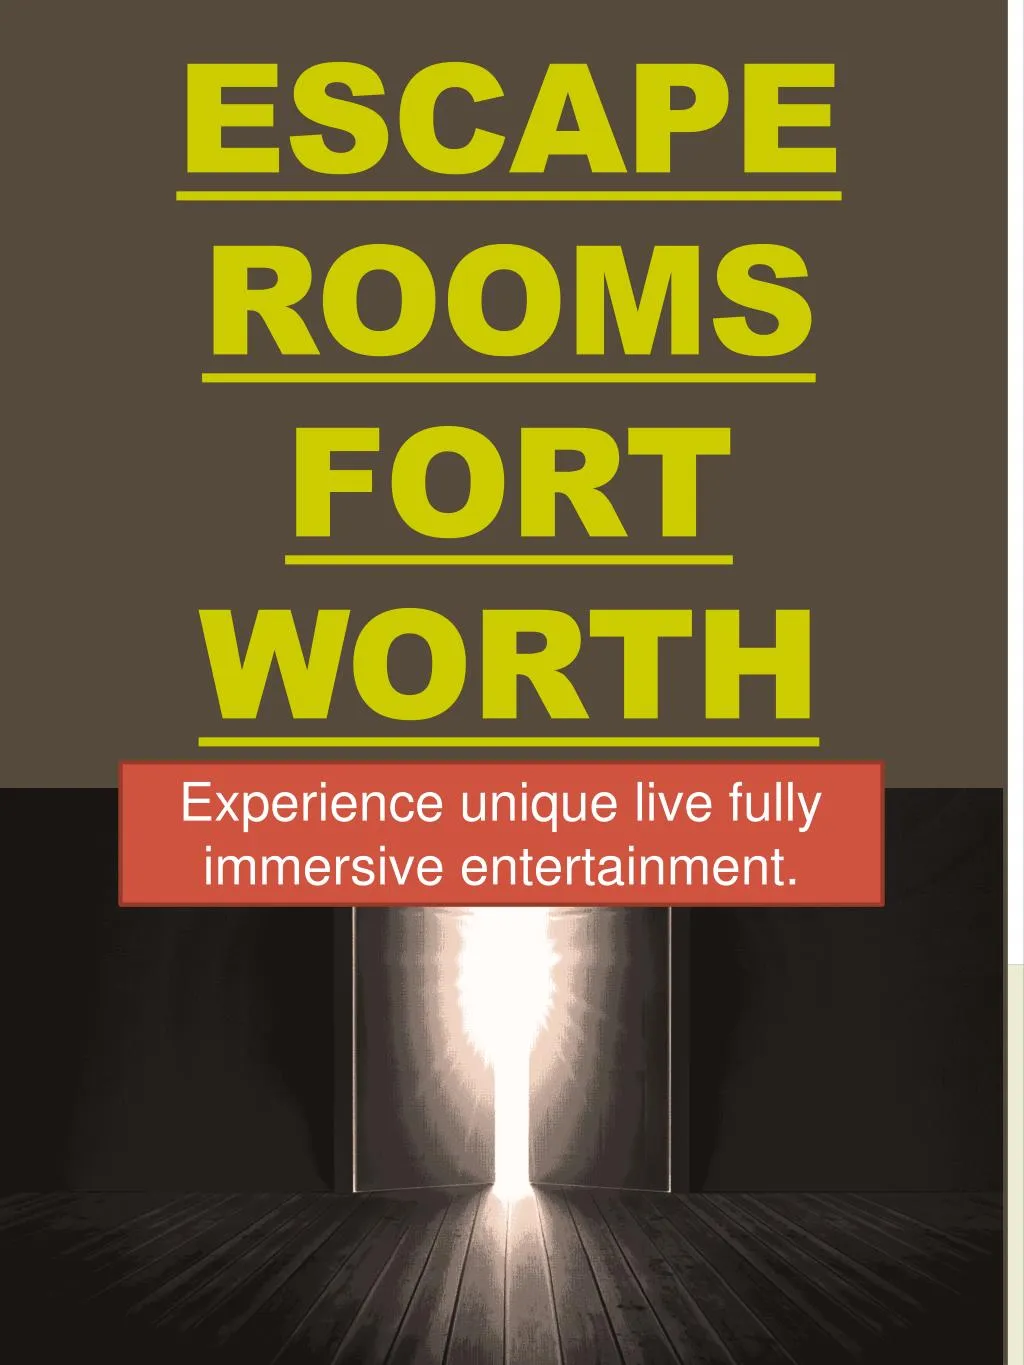 escape rooms fort worth